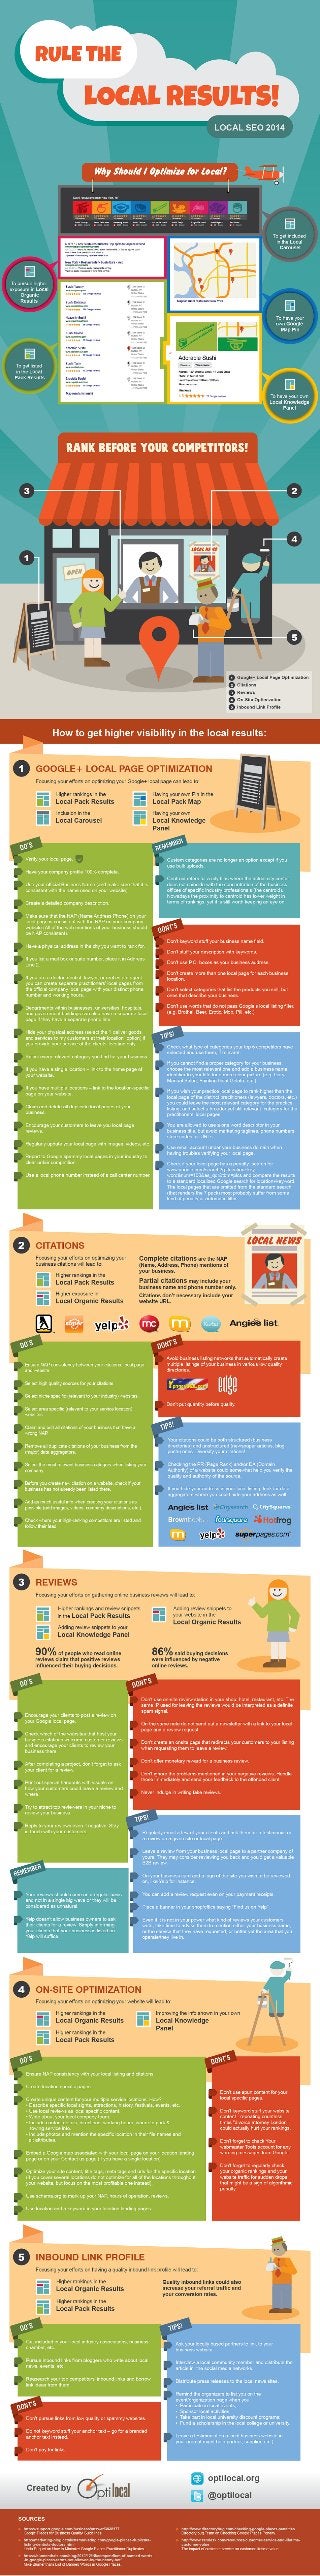 Rule the Local Search Results - The Infographic by OptiLocal